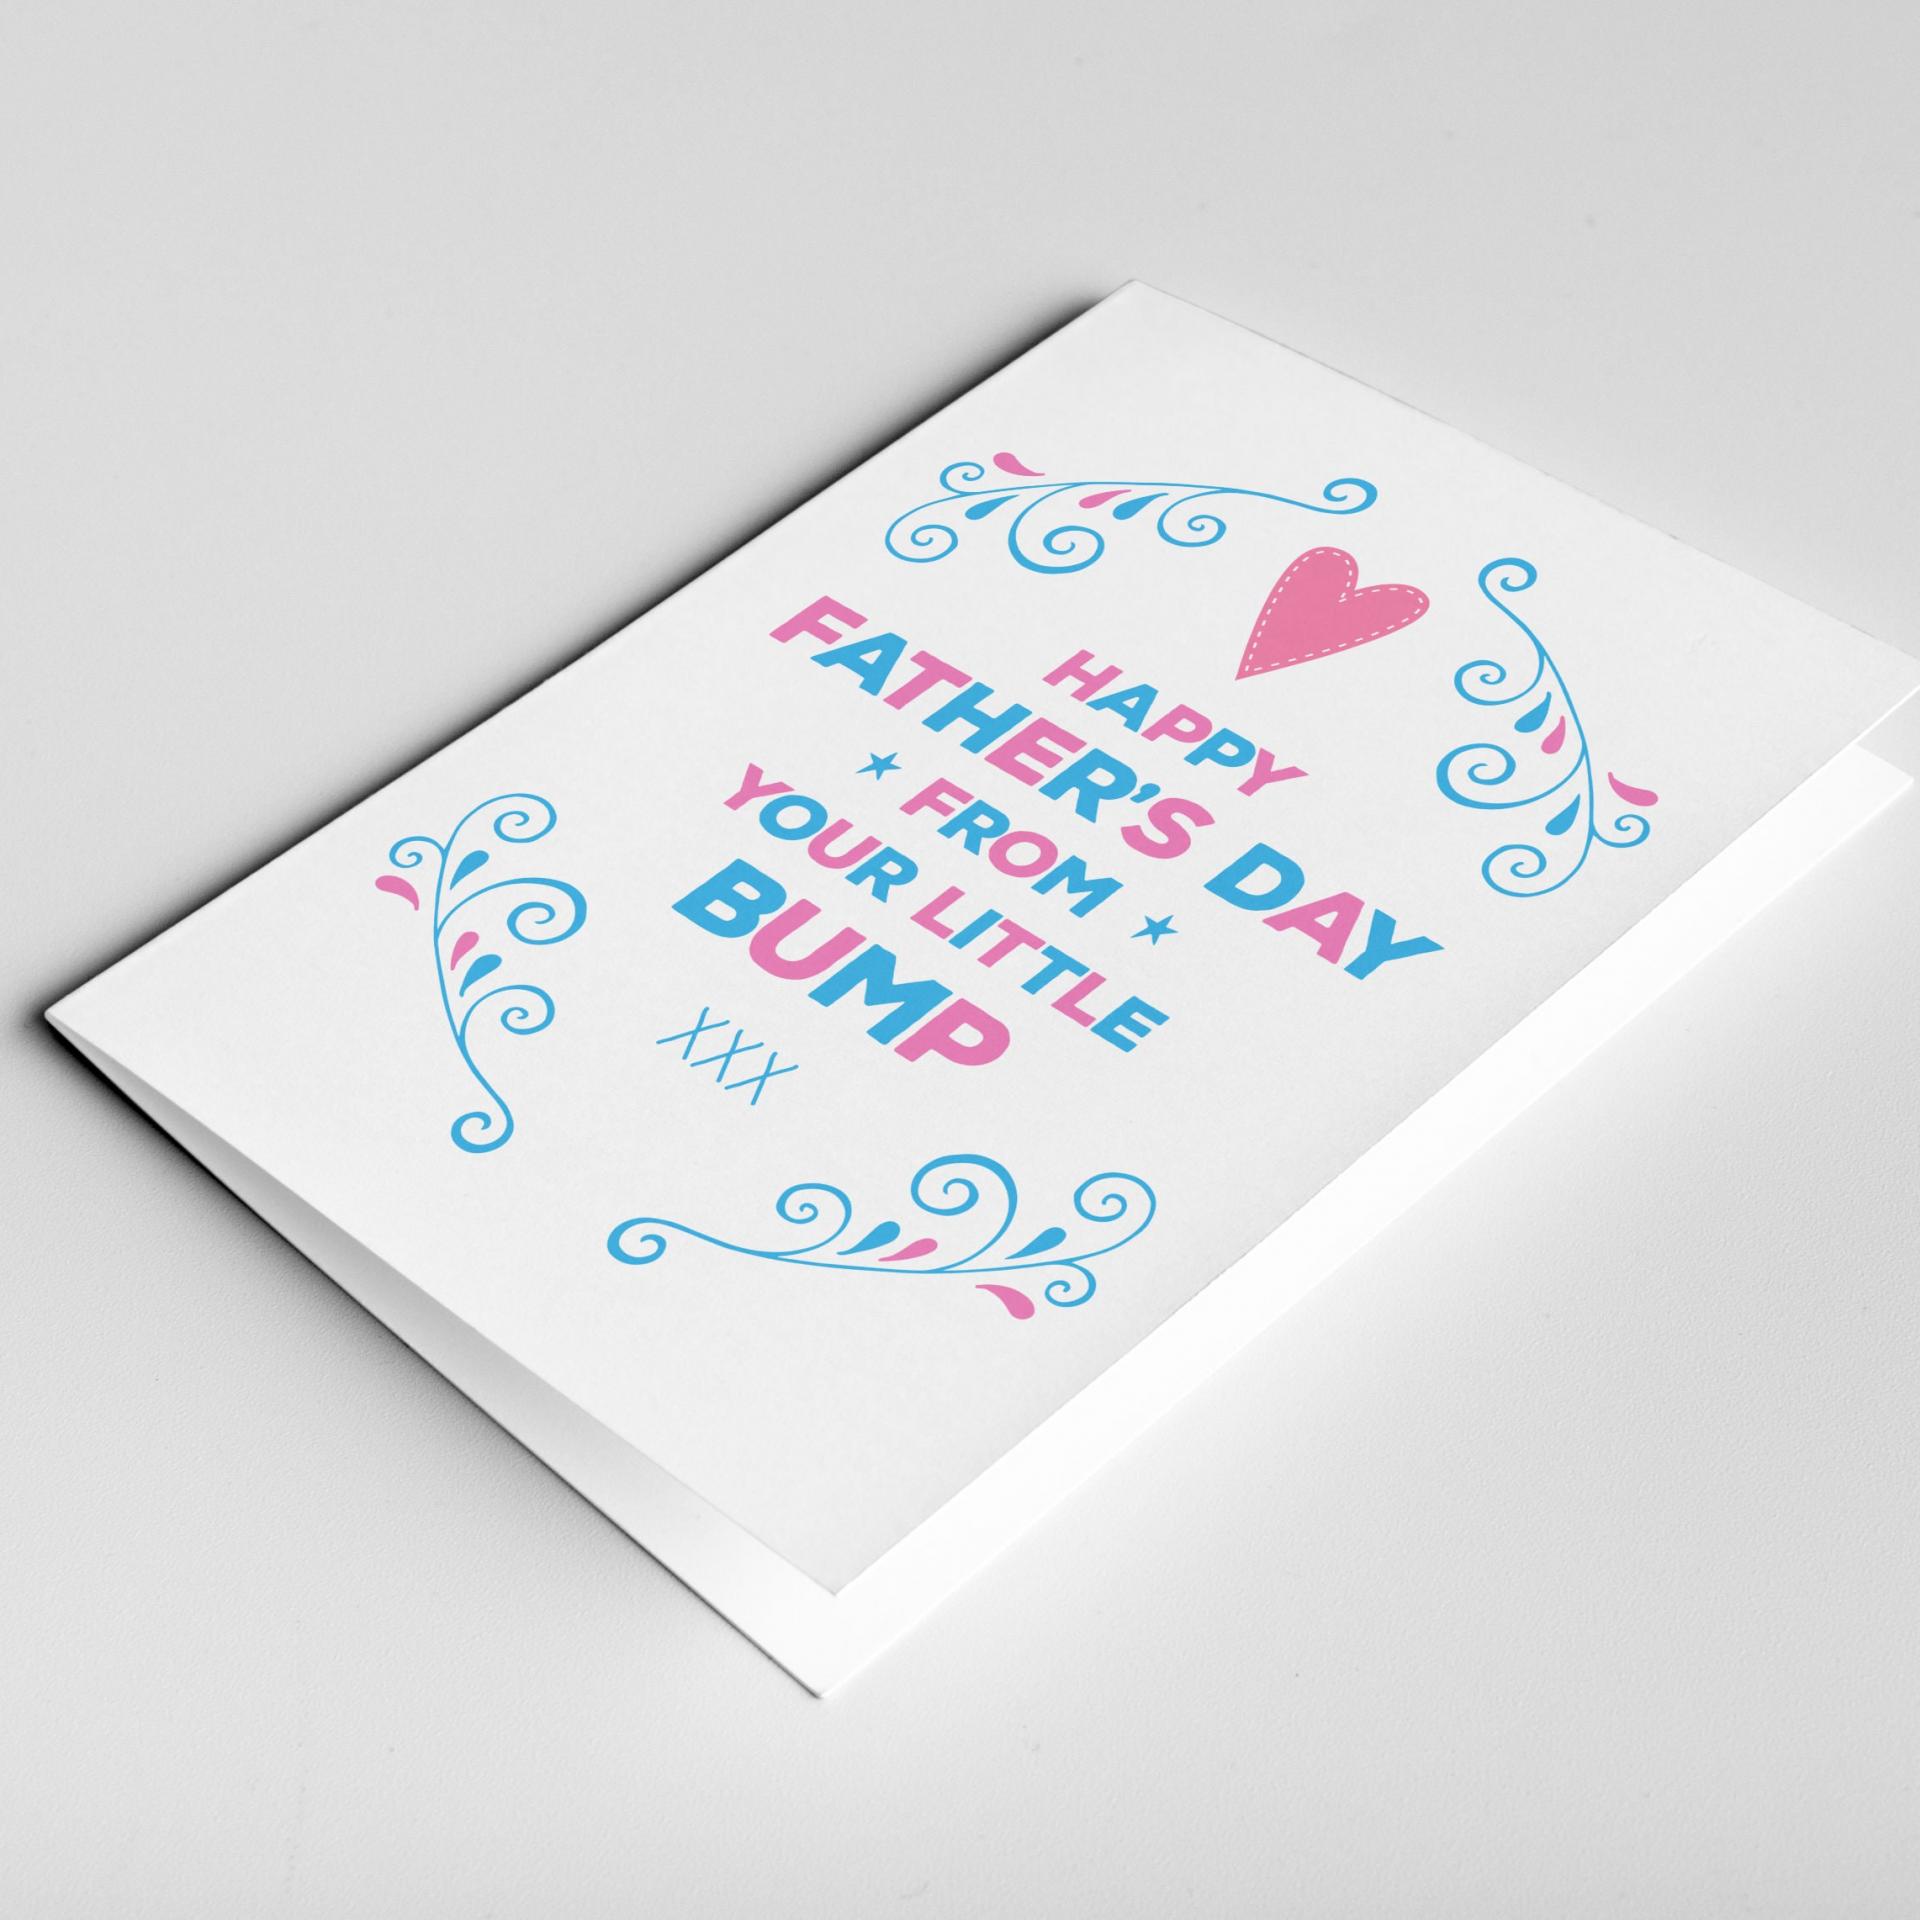 Father's Day From The Bump Card, Pregnant Father's Day Card, Card for Husband, Pregnant Father's Day Gift, Expectant Dad Card, New Dad Card